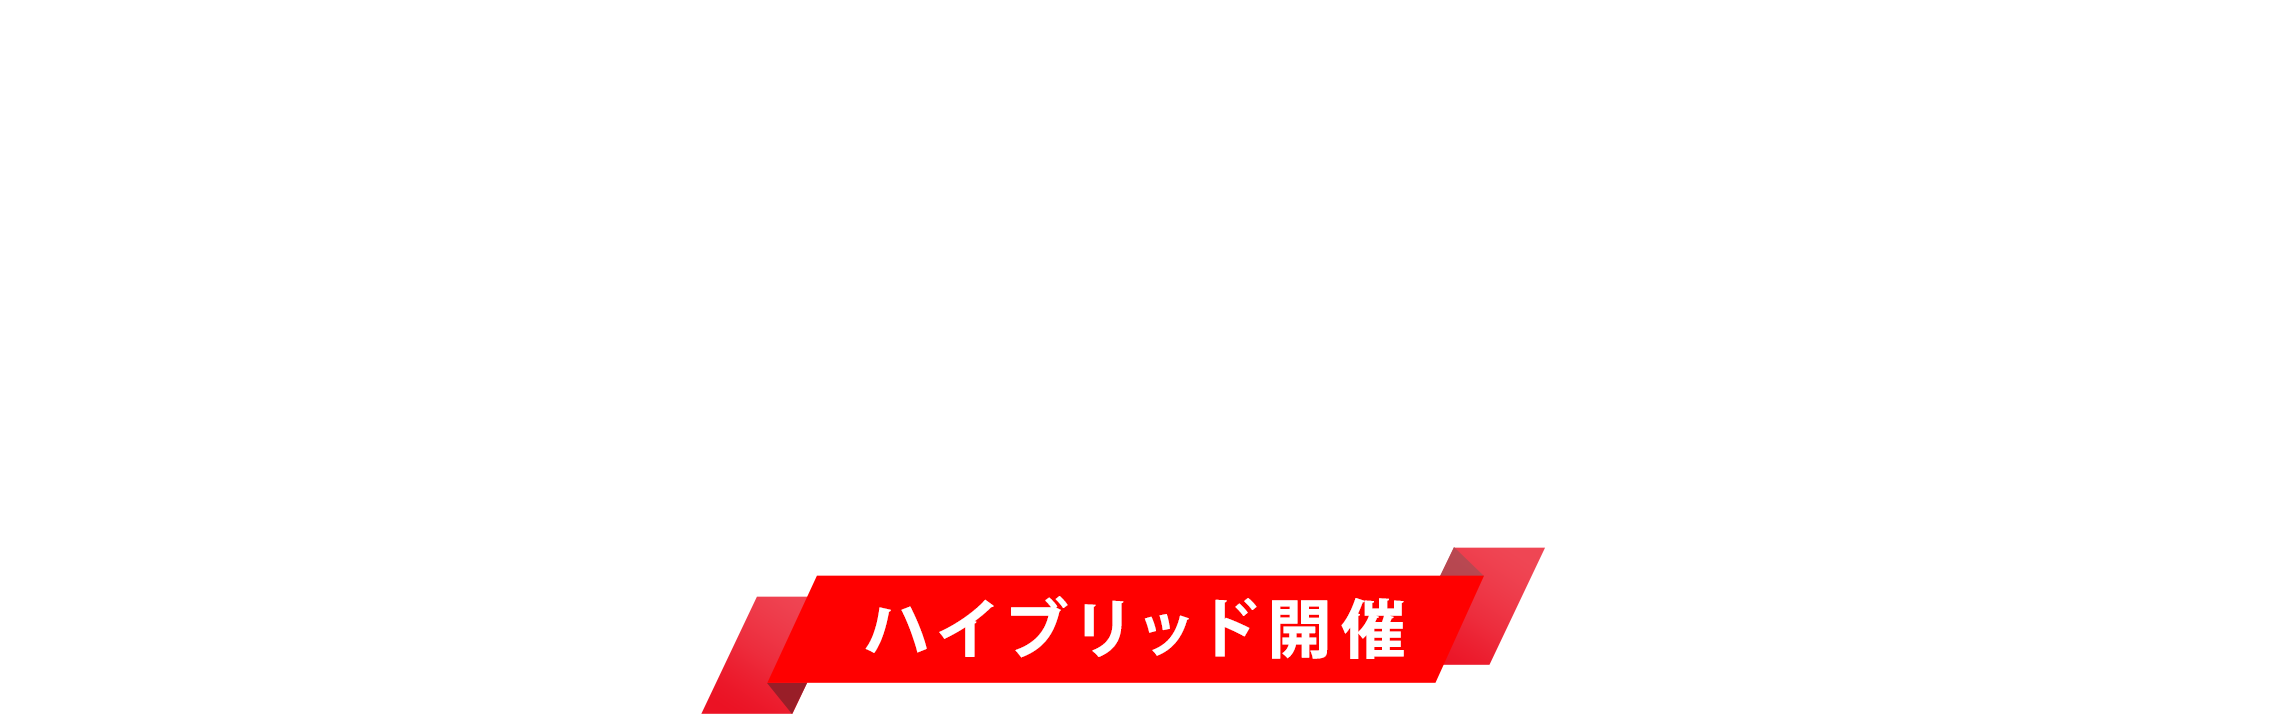 THE DEMODAY